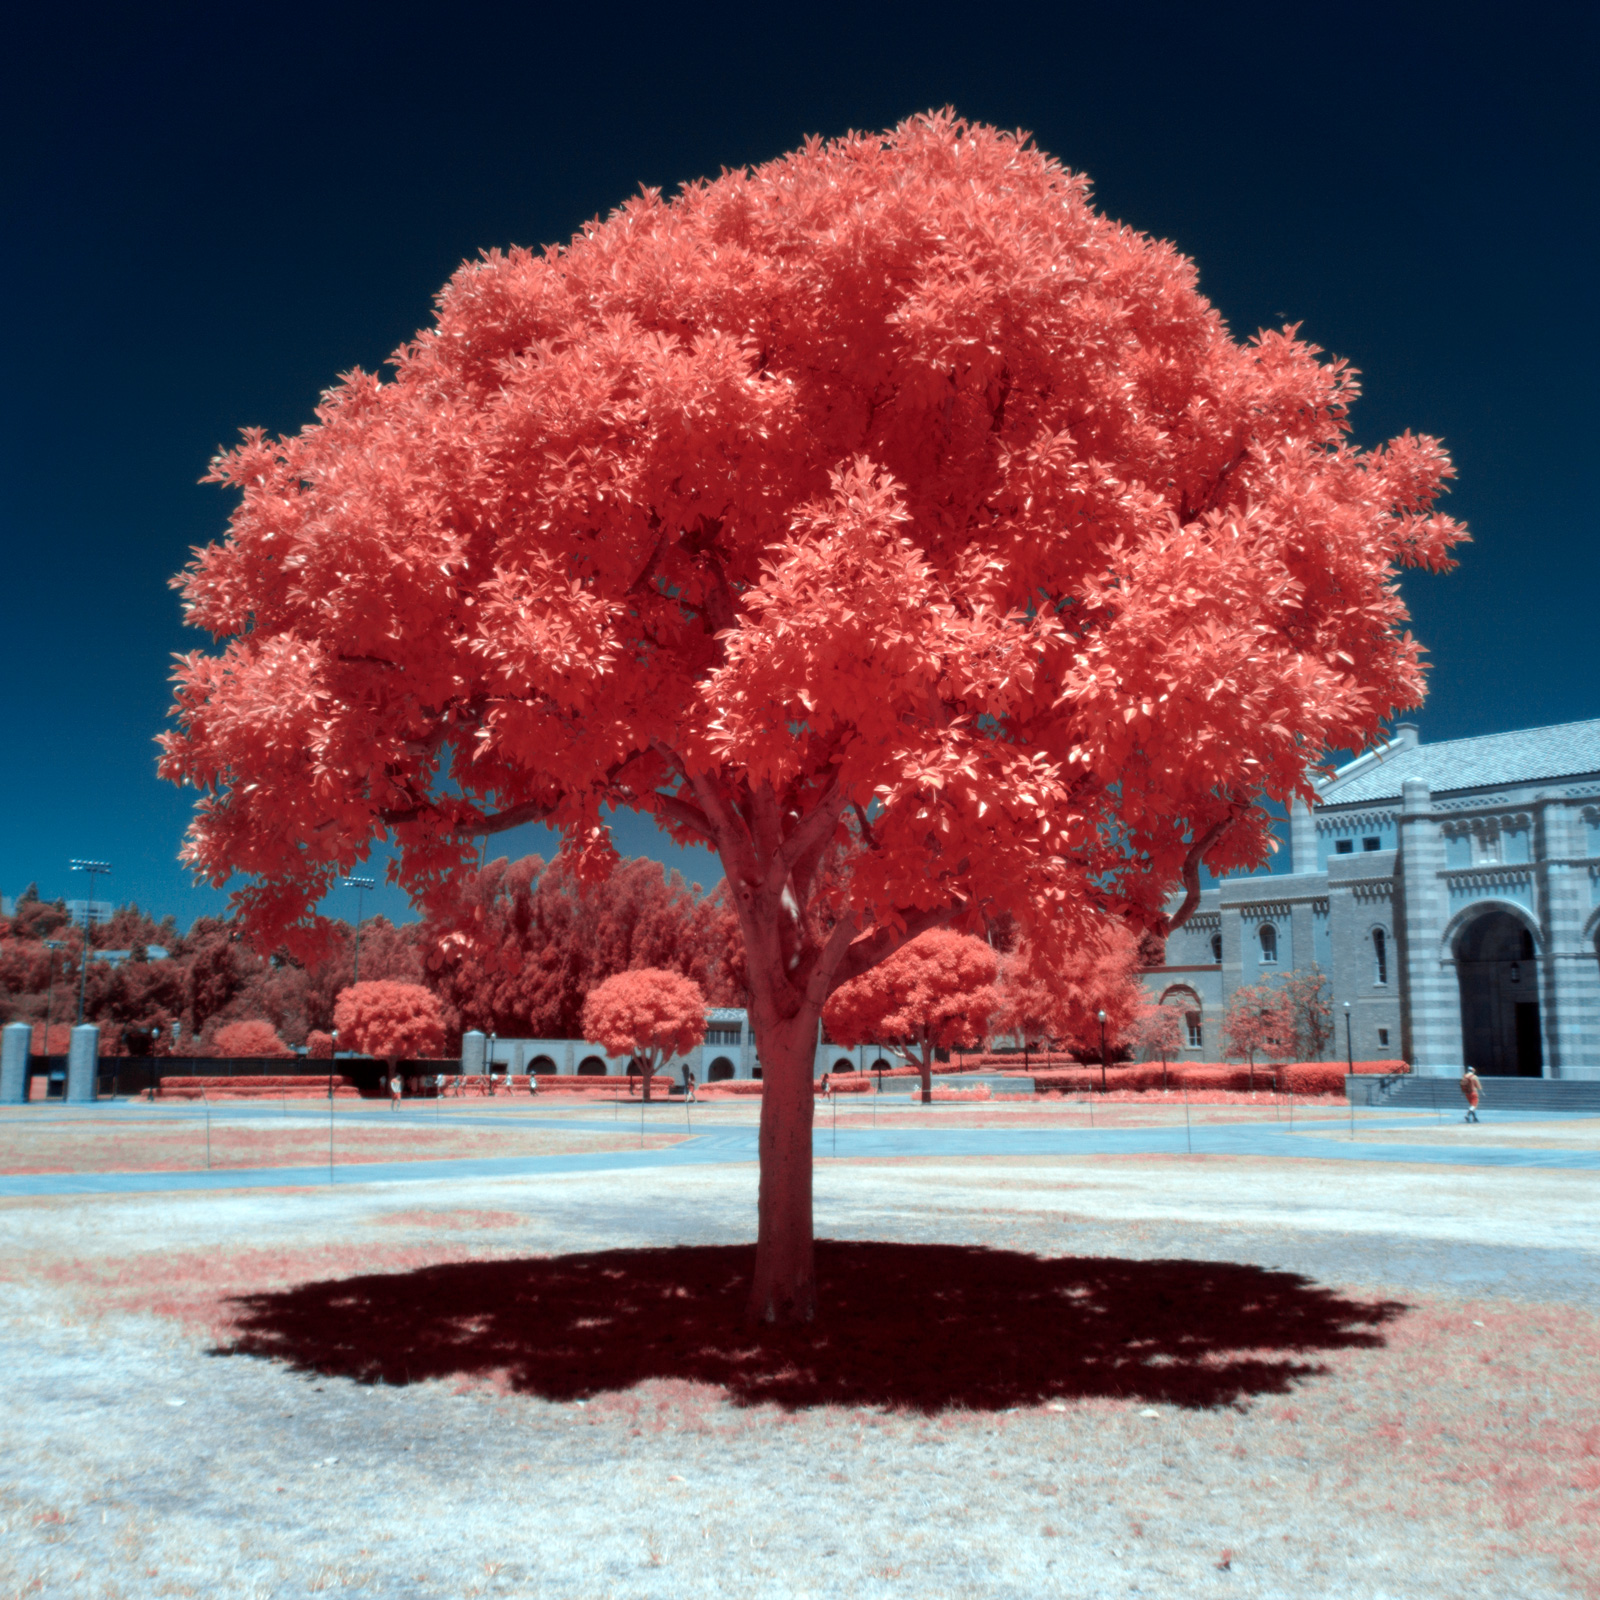 Digital Infrared Photography by Chris Peters